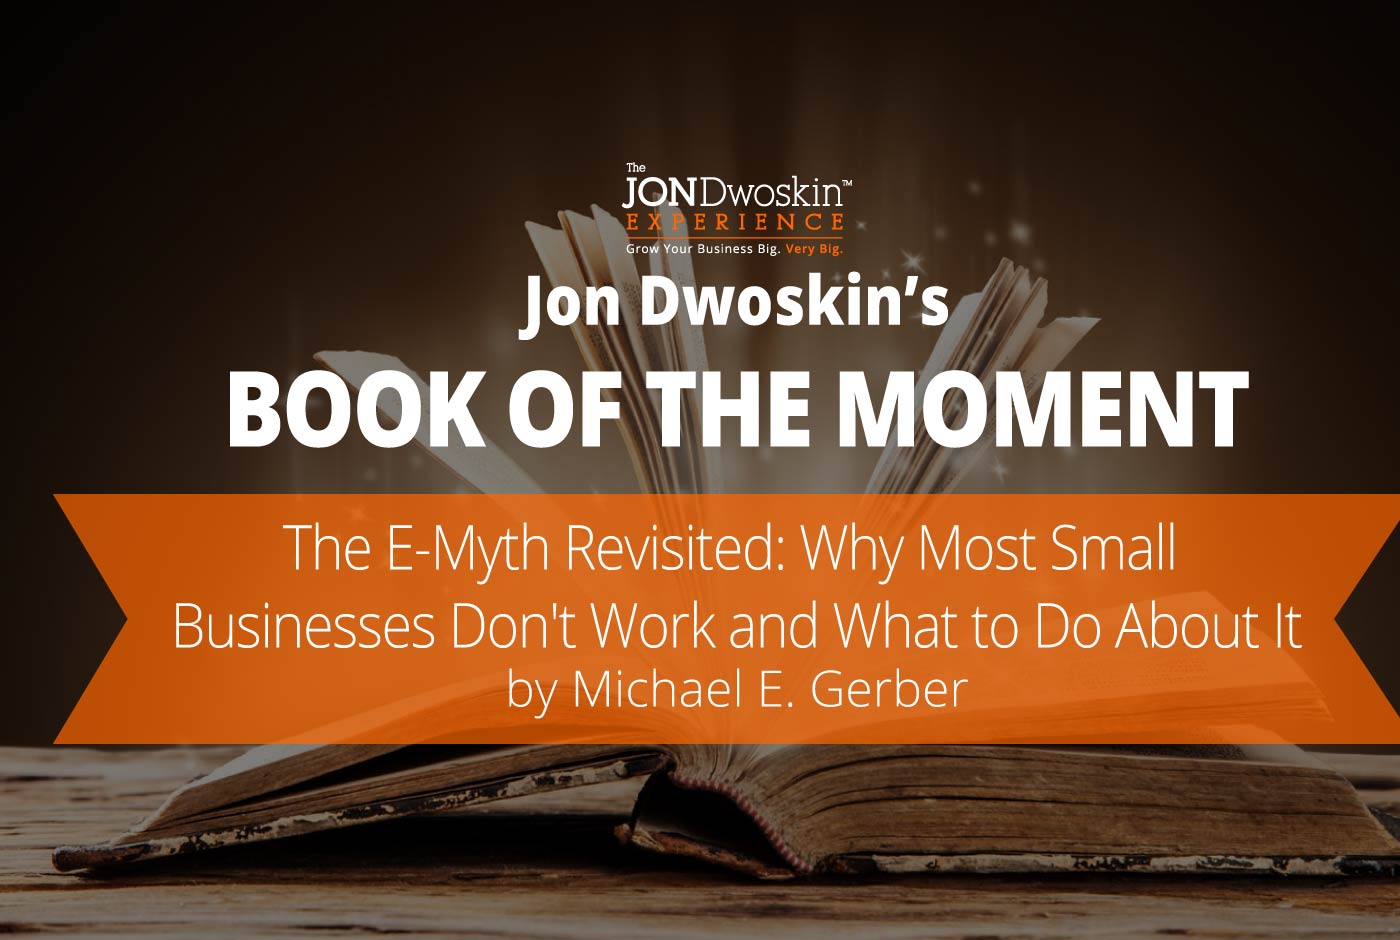 Jon Dwoskin's Book of the Moment - The E-Myth Revisited: Why Most Small Businesses Don't Work and What to Do About It